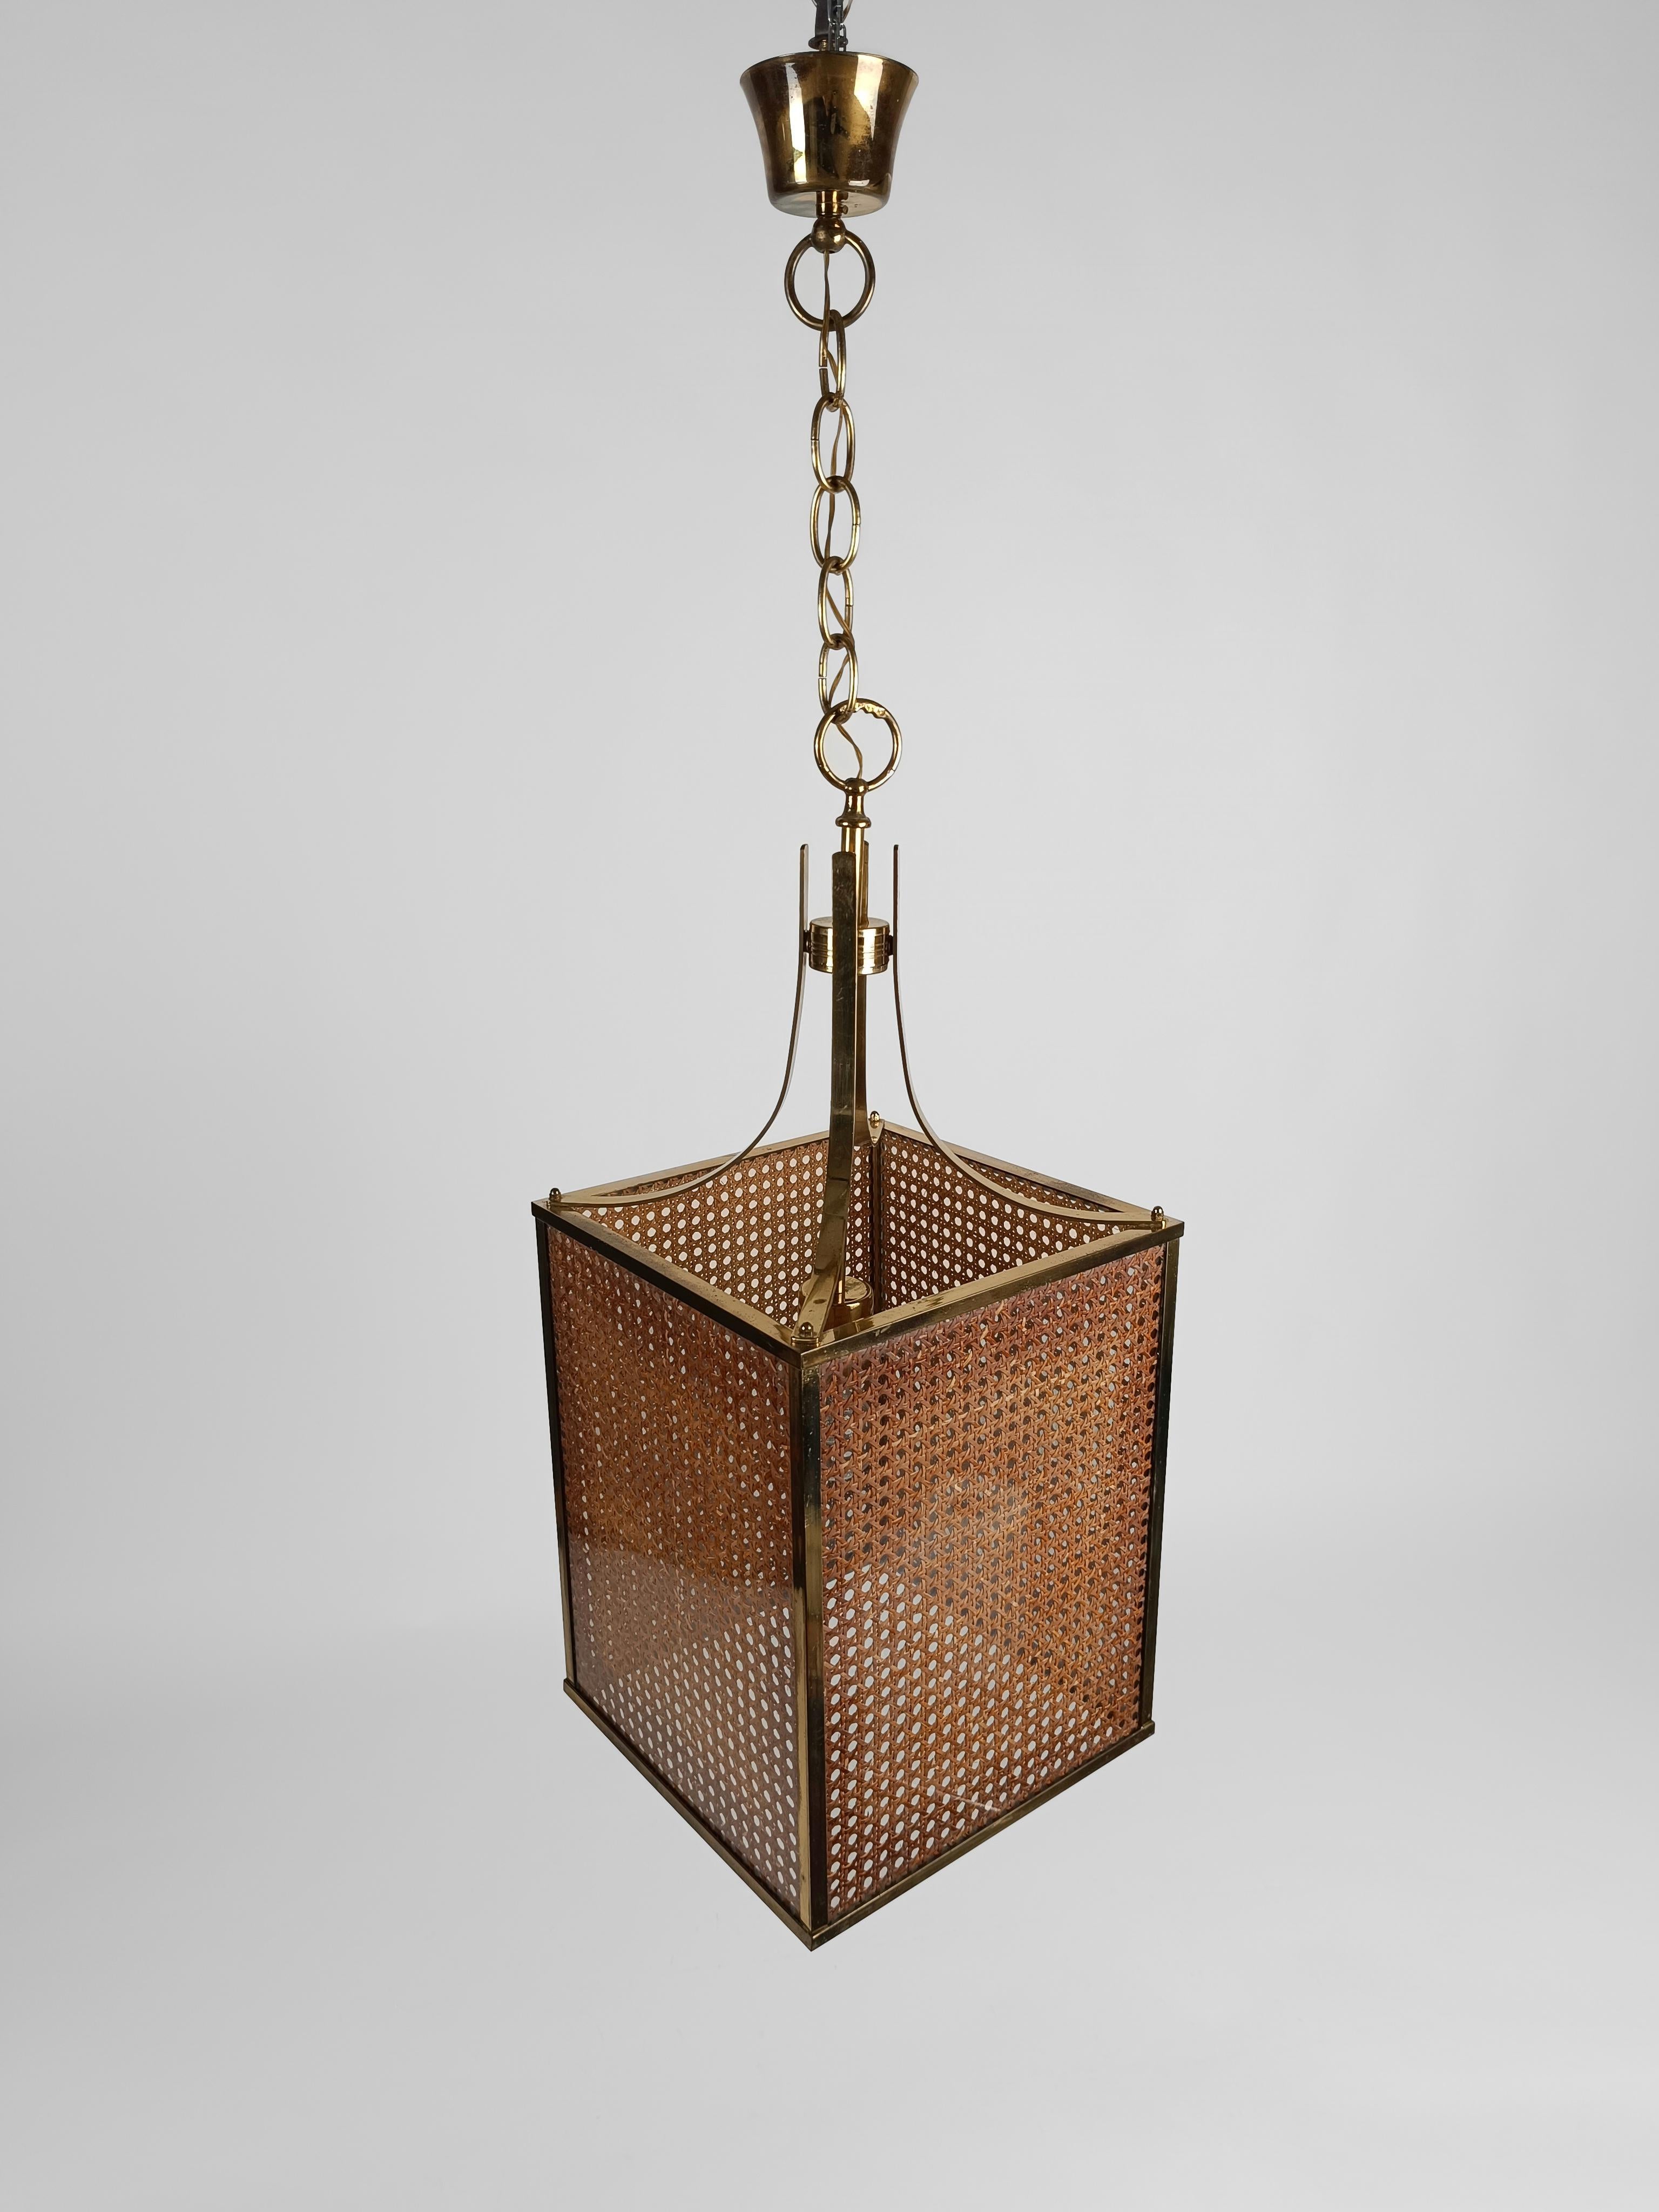 70s Pendant Light made in Brass Glass & Cane Webbing, Chinese Chippendale style  For Sale 6